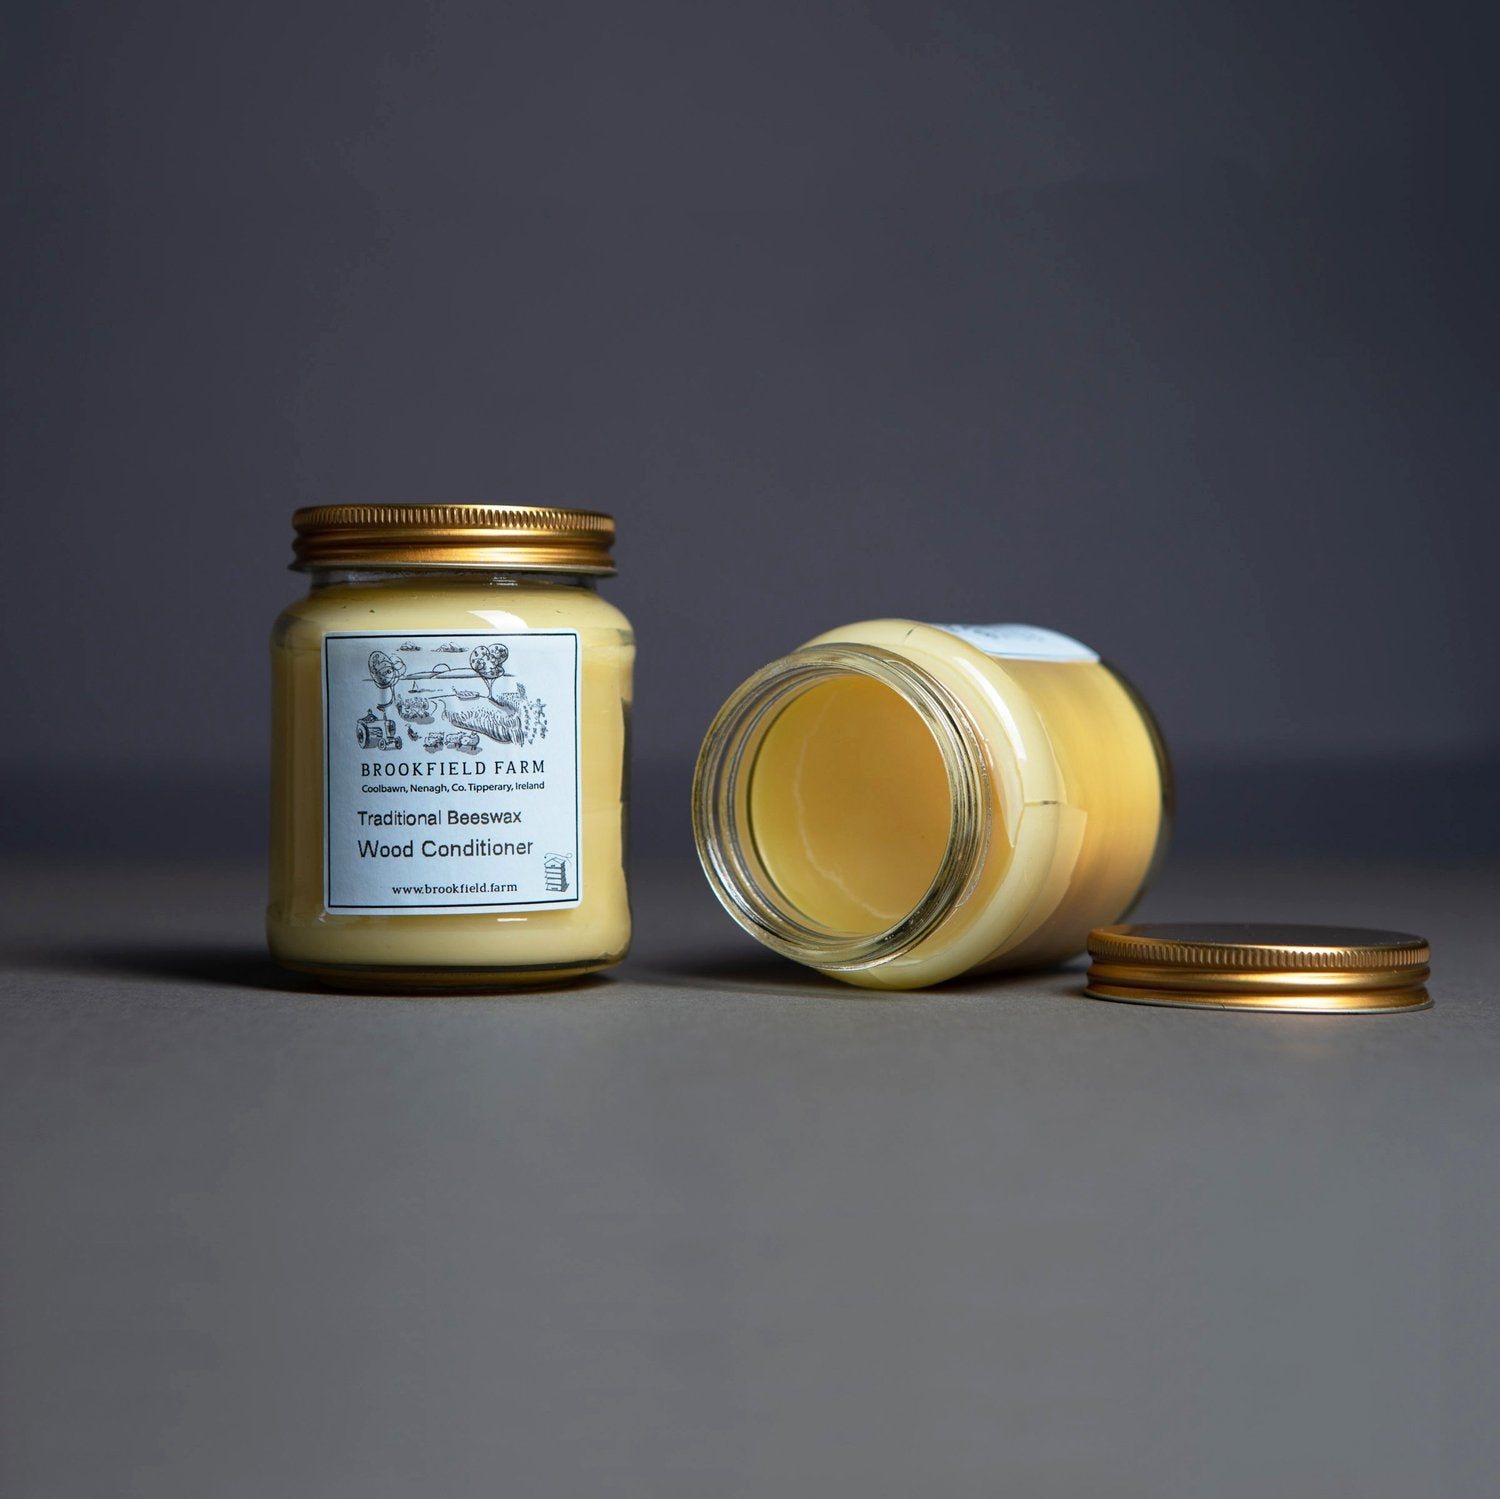 Brookfield Farm  - Traditional Beeswax Wood Conditioner